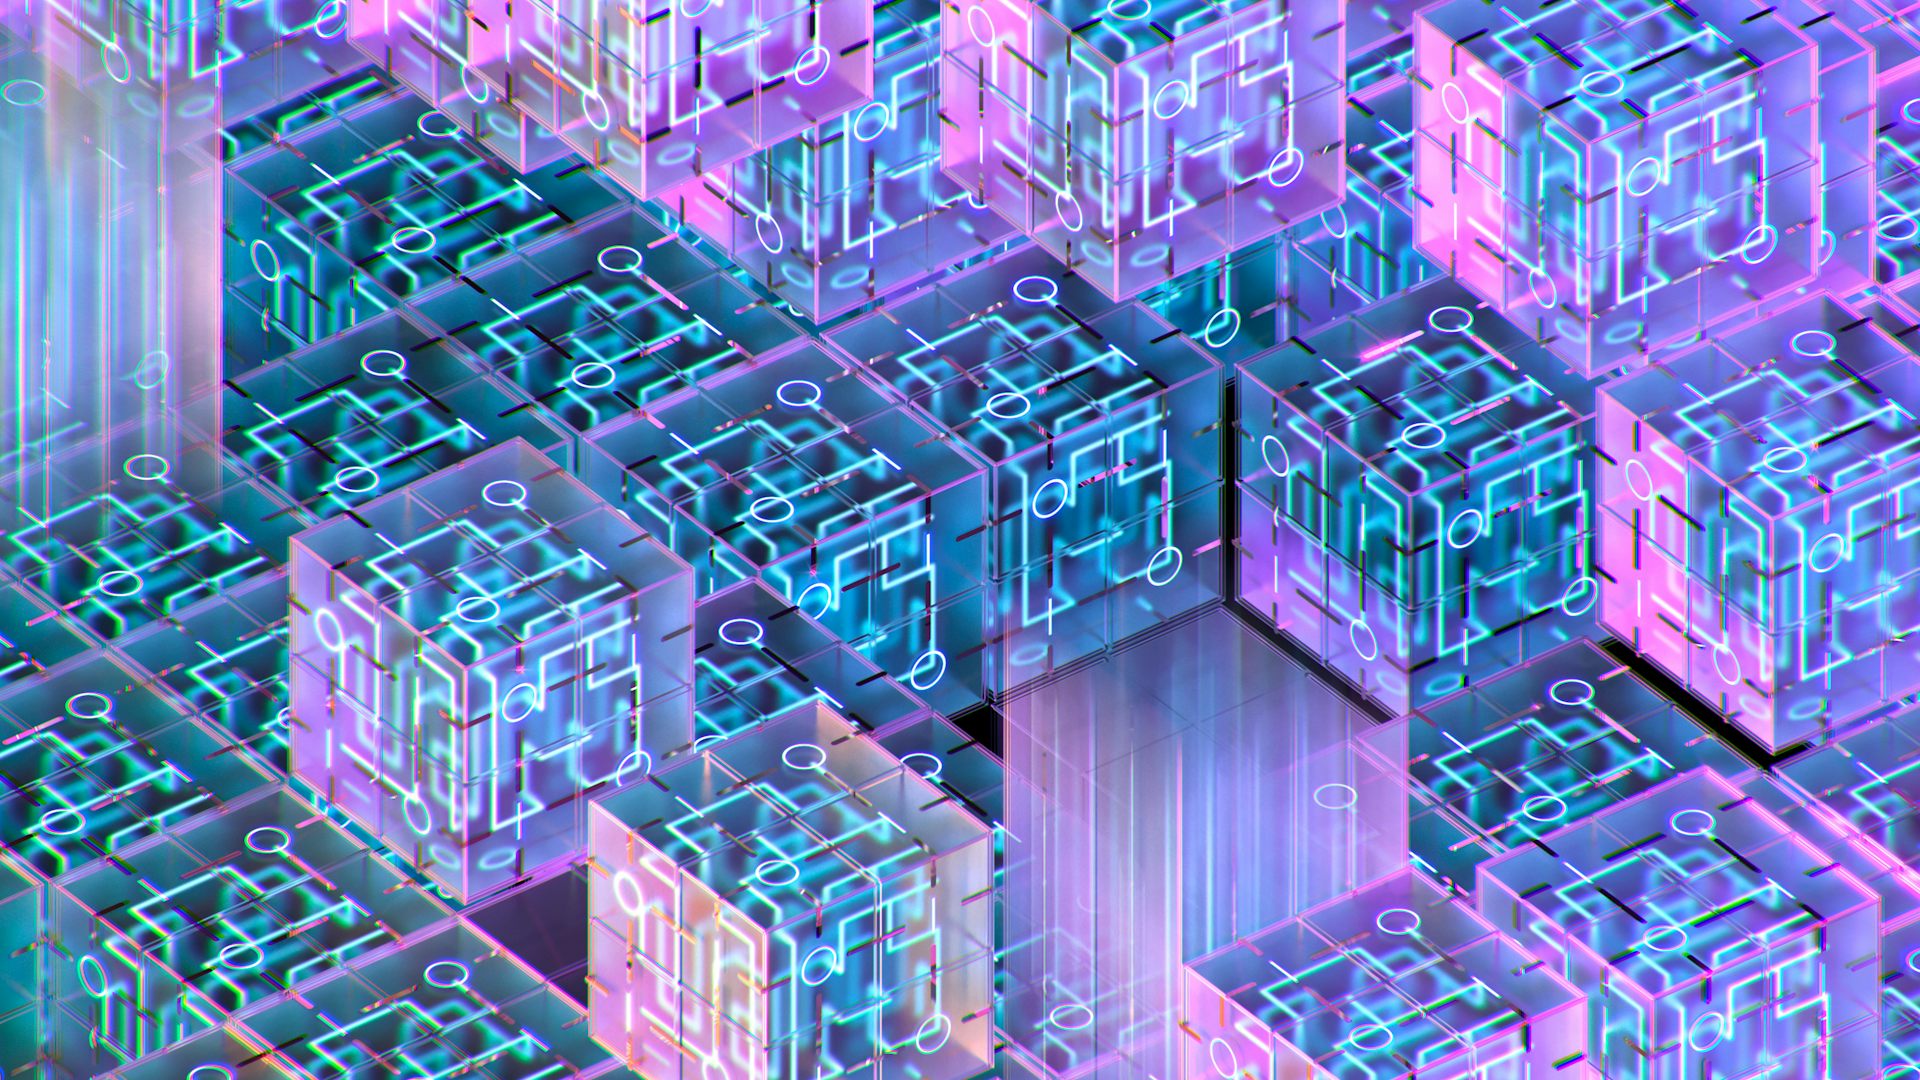 A quantum computing future is unlikely, due to random hardware errors